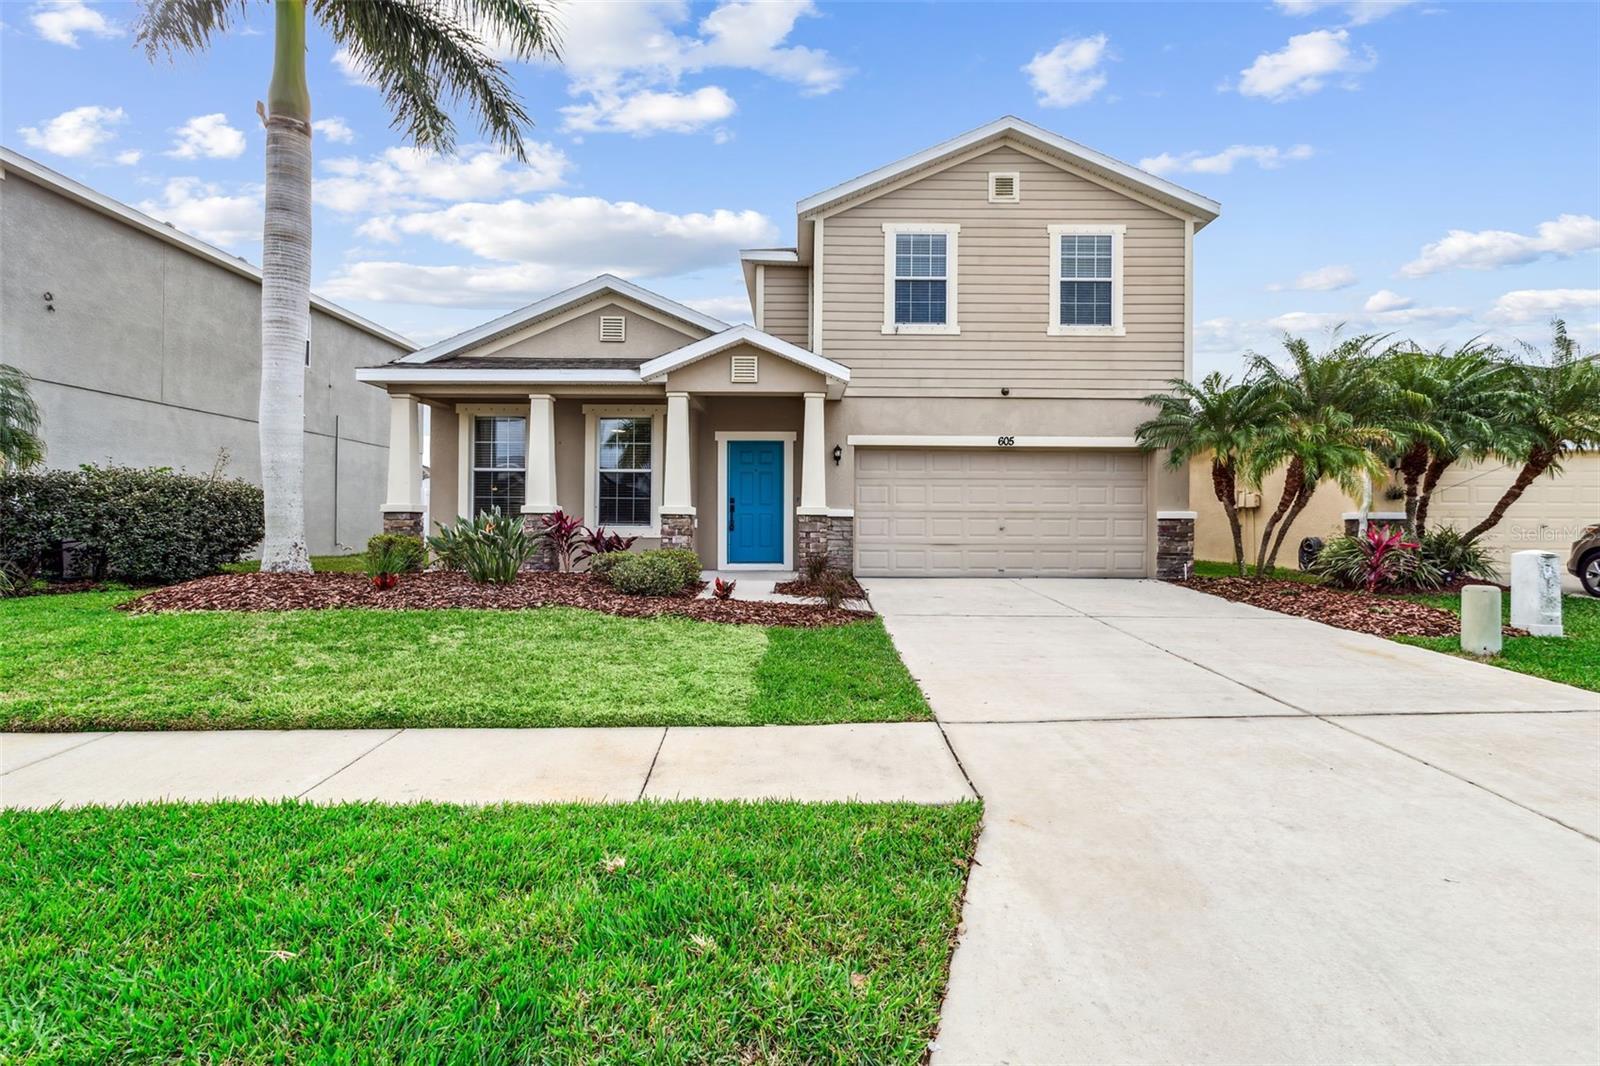 Photo one of 605 19Th Nw St Ruskin FL 33570 | MLS T3498529